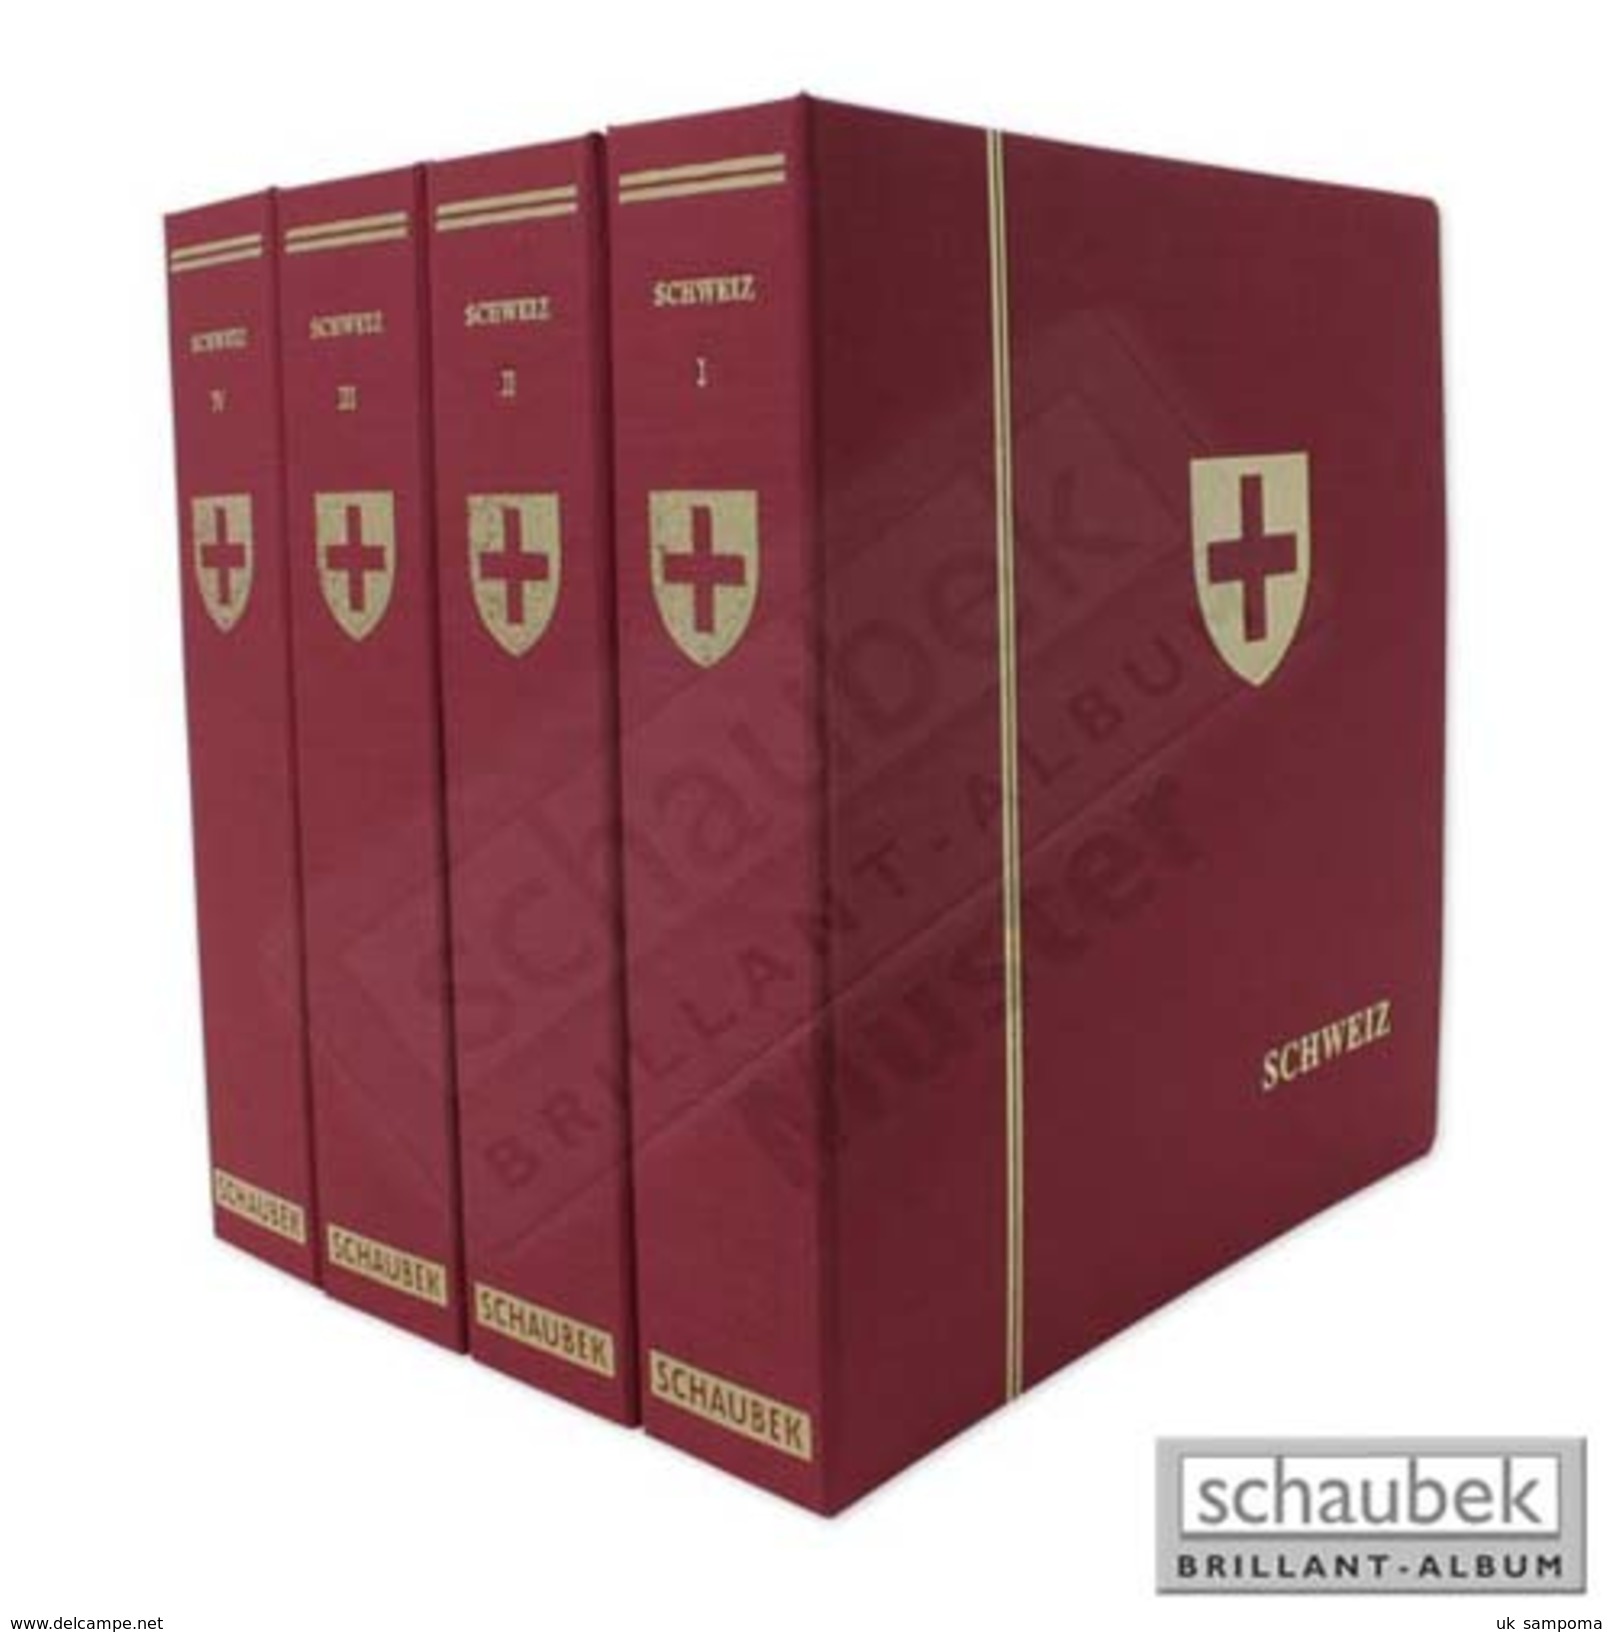 Schaubek Dsp806 Screw Post Binder Cloth With Golden Country Embossing And Coat Of Arms Danmark Blue - Large Format, Black Pages